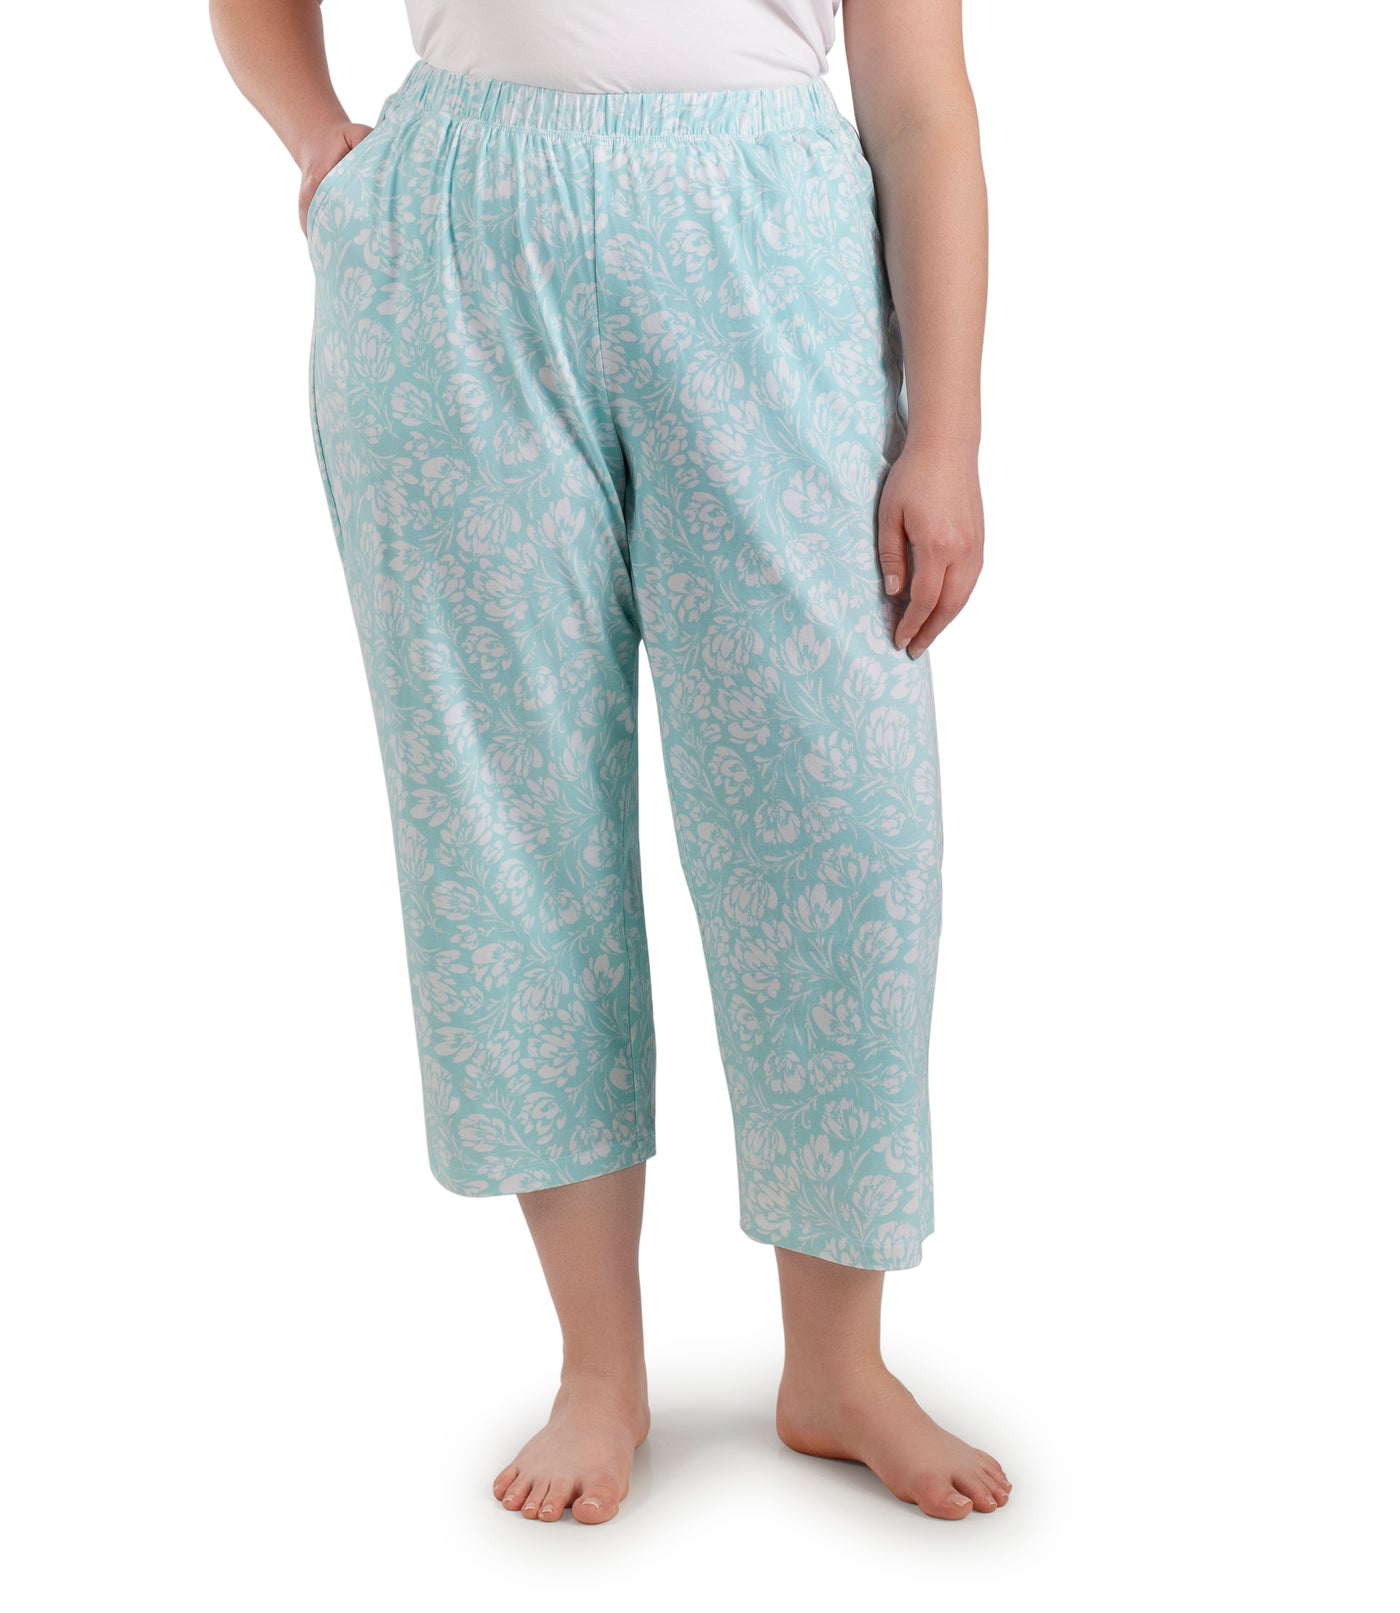 Bottom half of plus sized woman, facing front, wearing JunoActive JunoBliss Pocketed Sleep Capris Spring Blue Floral Print. The capri hemline is a few inches above ankle and a little longer than mid calf. Pockets on both sides.